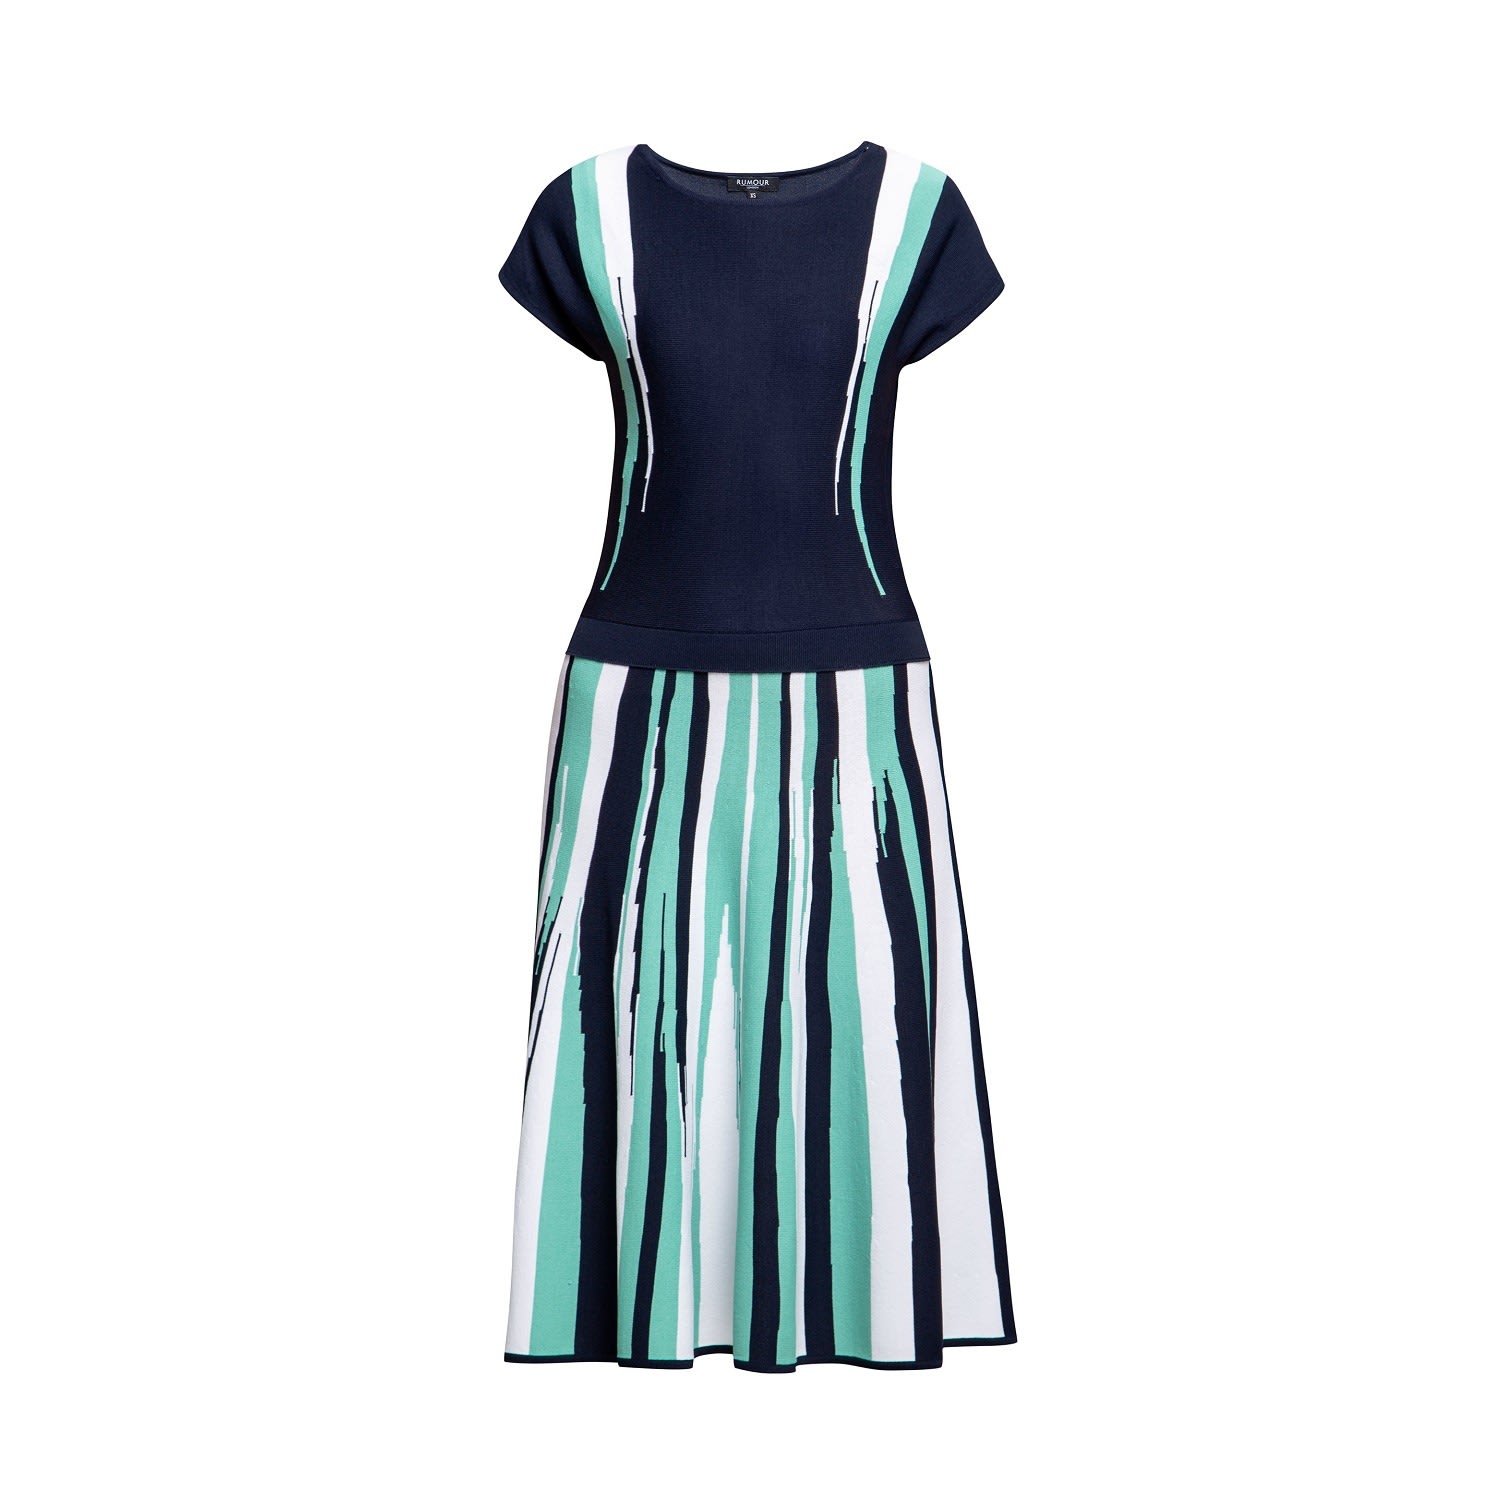 Women’s Green / Blue / White Iris Striped Knitted Fit And Flare Dress In Navy And Turquoise Small Rumour London